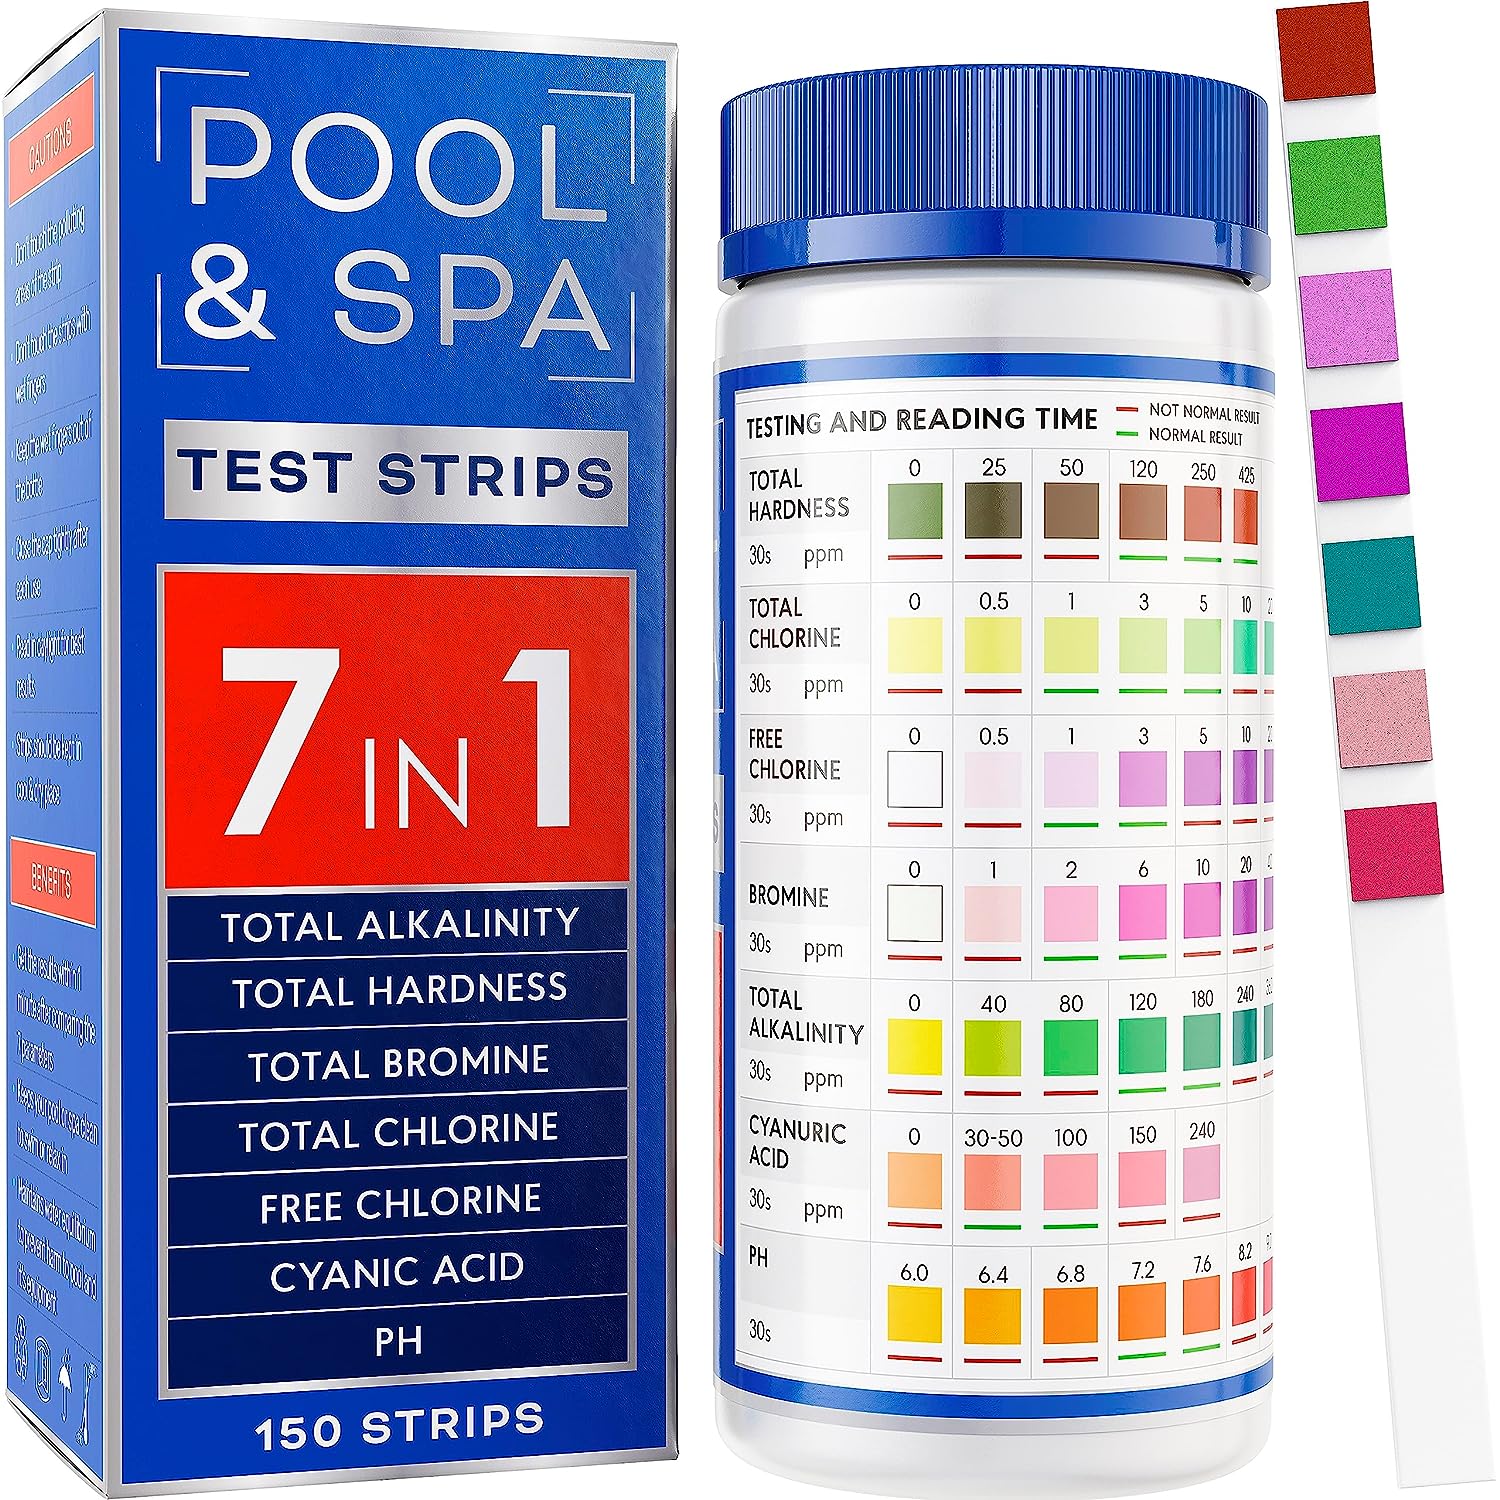 Hot Tub Test Strips for Chlorine & Bromine